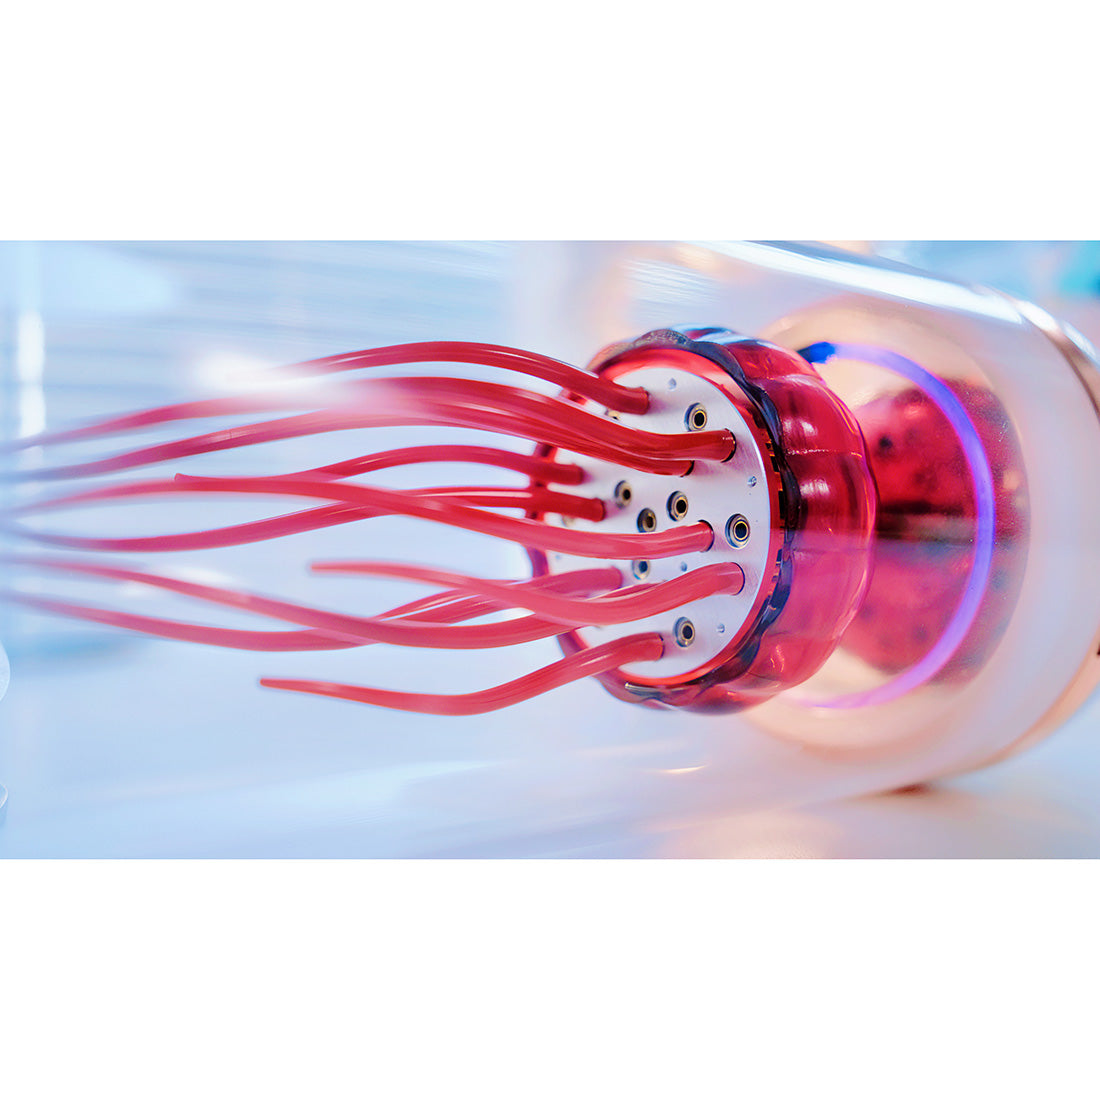 Mechanical Rhythm Red Capsule Jellyfish Kinetic Metal Model with Glass Cover